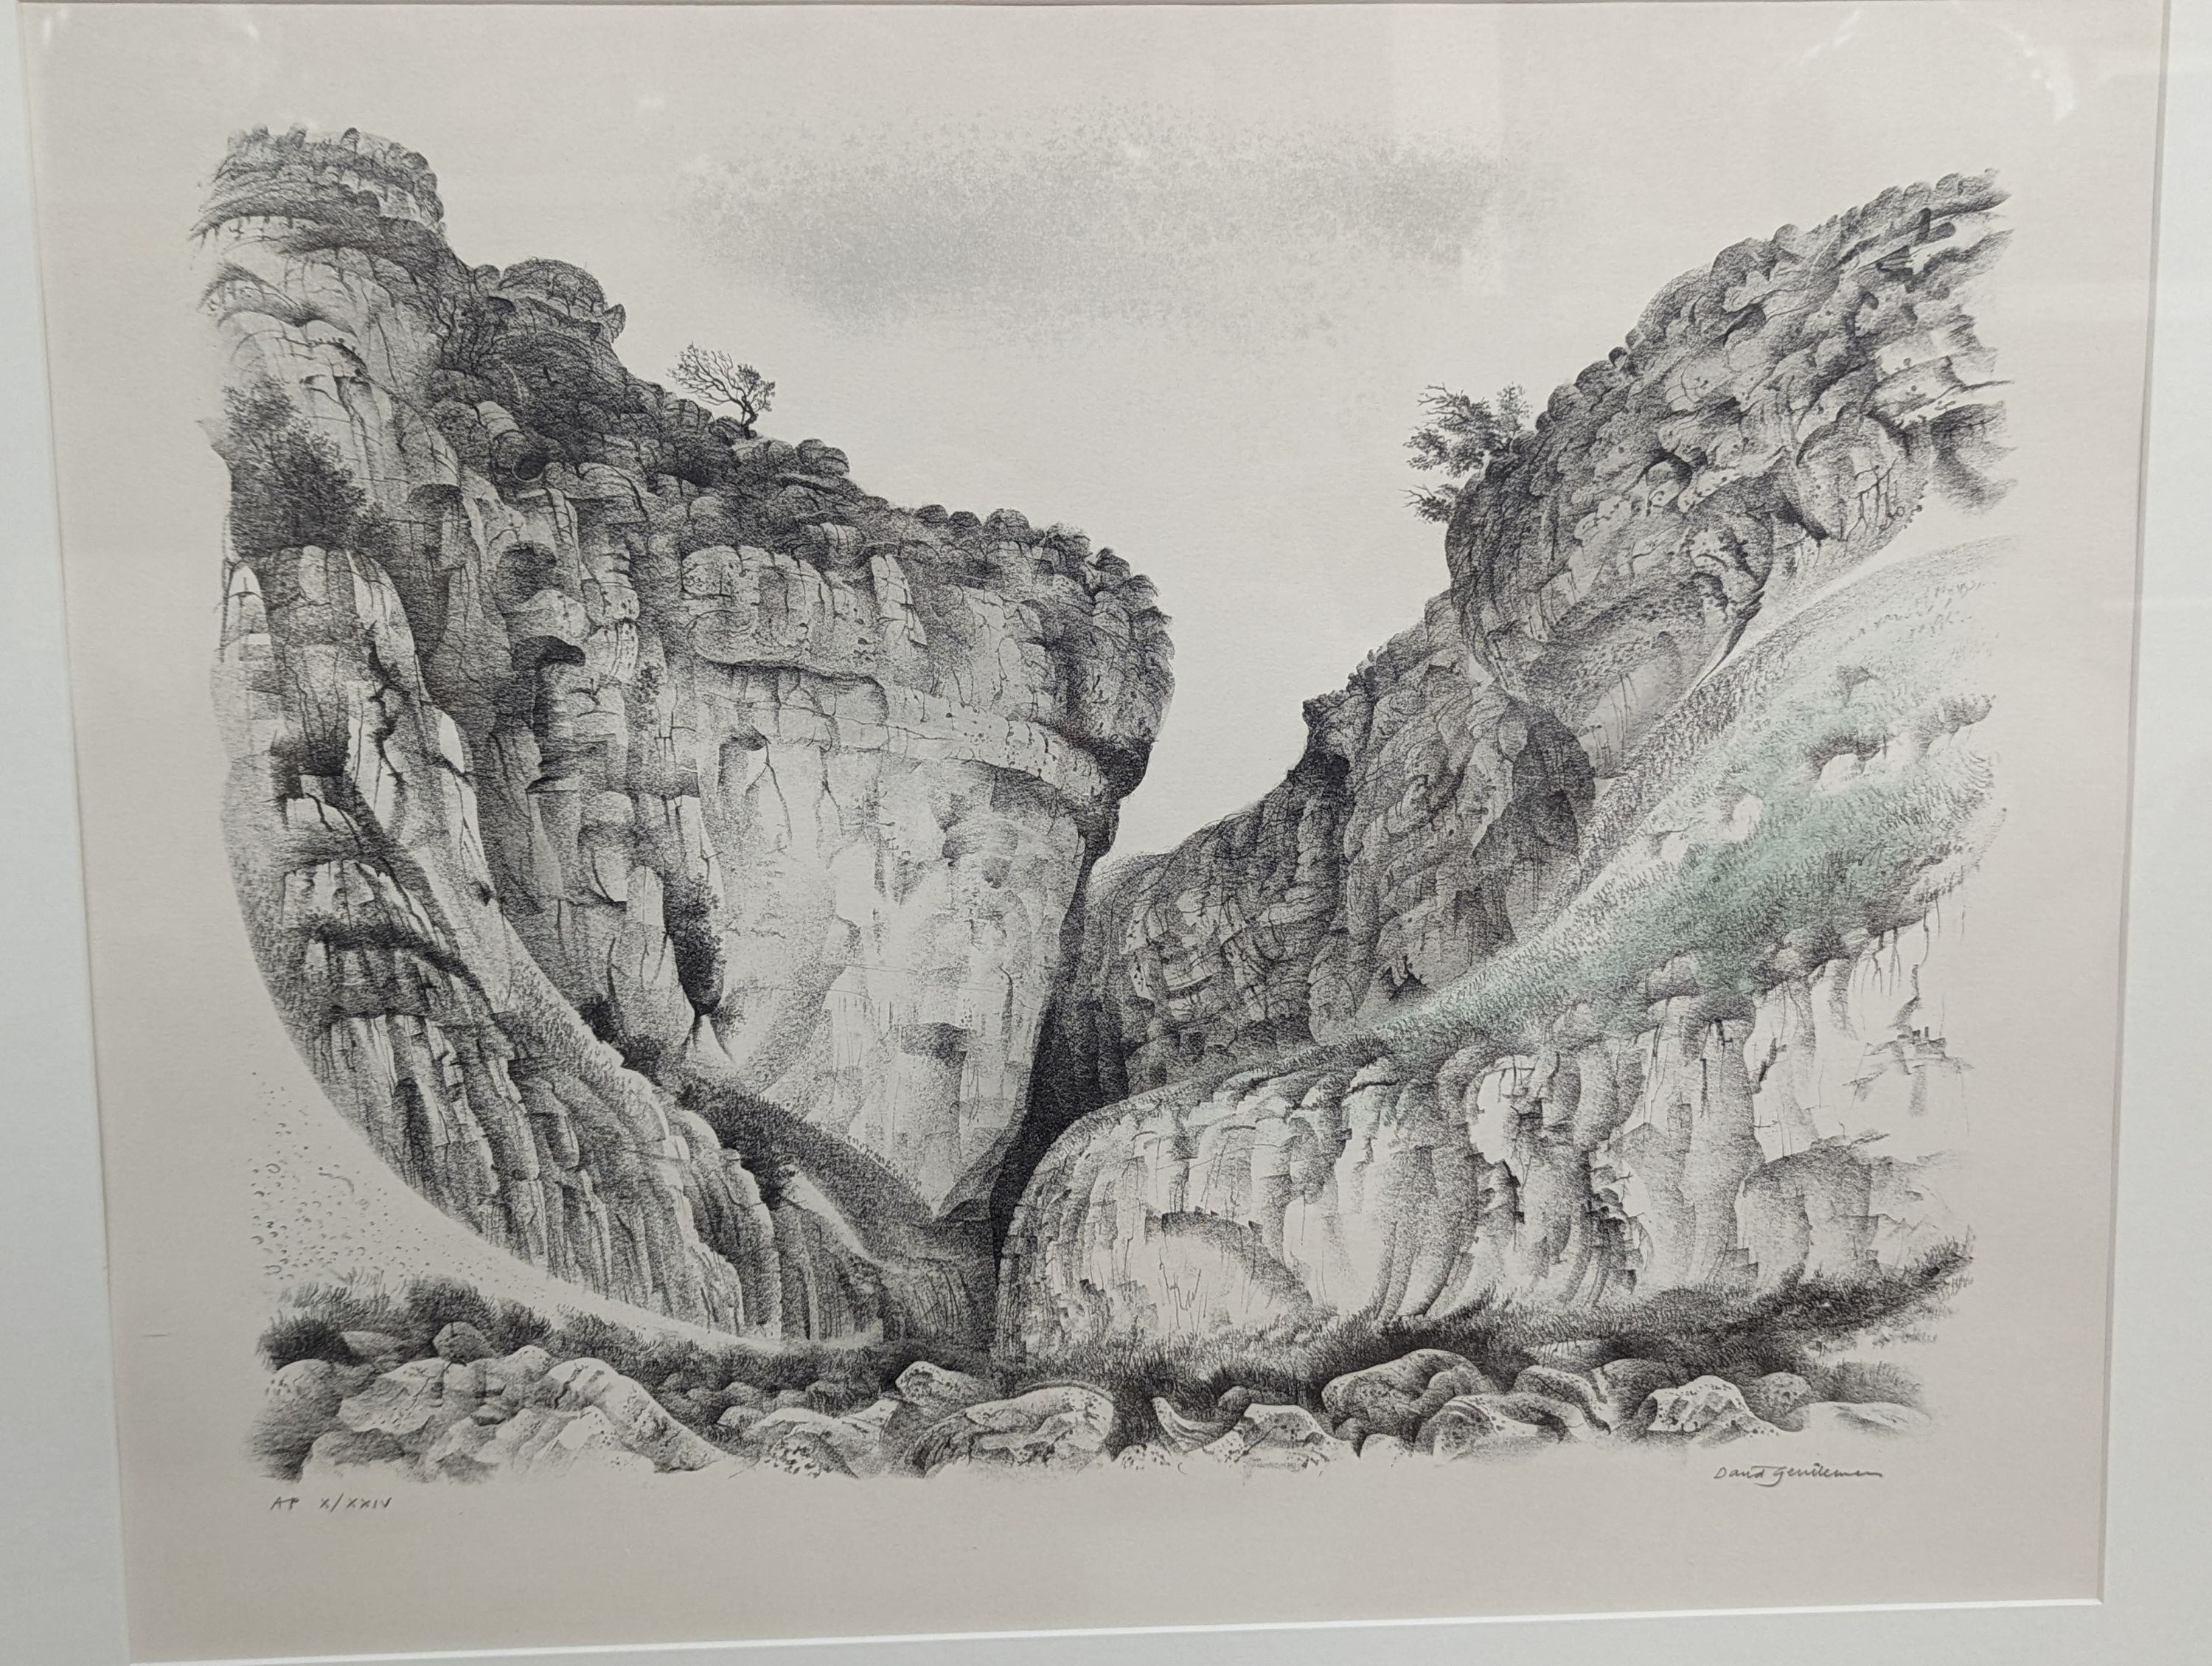 David Gentleman (b.1930), two lithographs, “Rocky Gully is Gordale Scar, North Yorkshire 1978. Provenance The Tate. The “Street Scene” is Covent Garden, London. Both Curwen Press., signed in pencil and numbered, largest